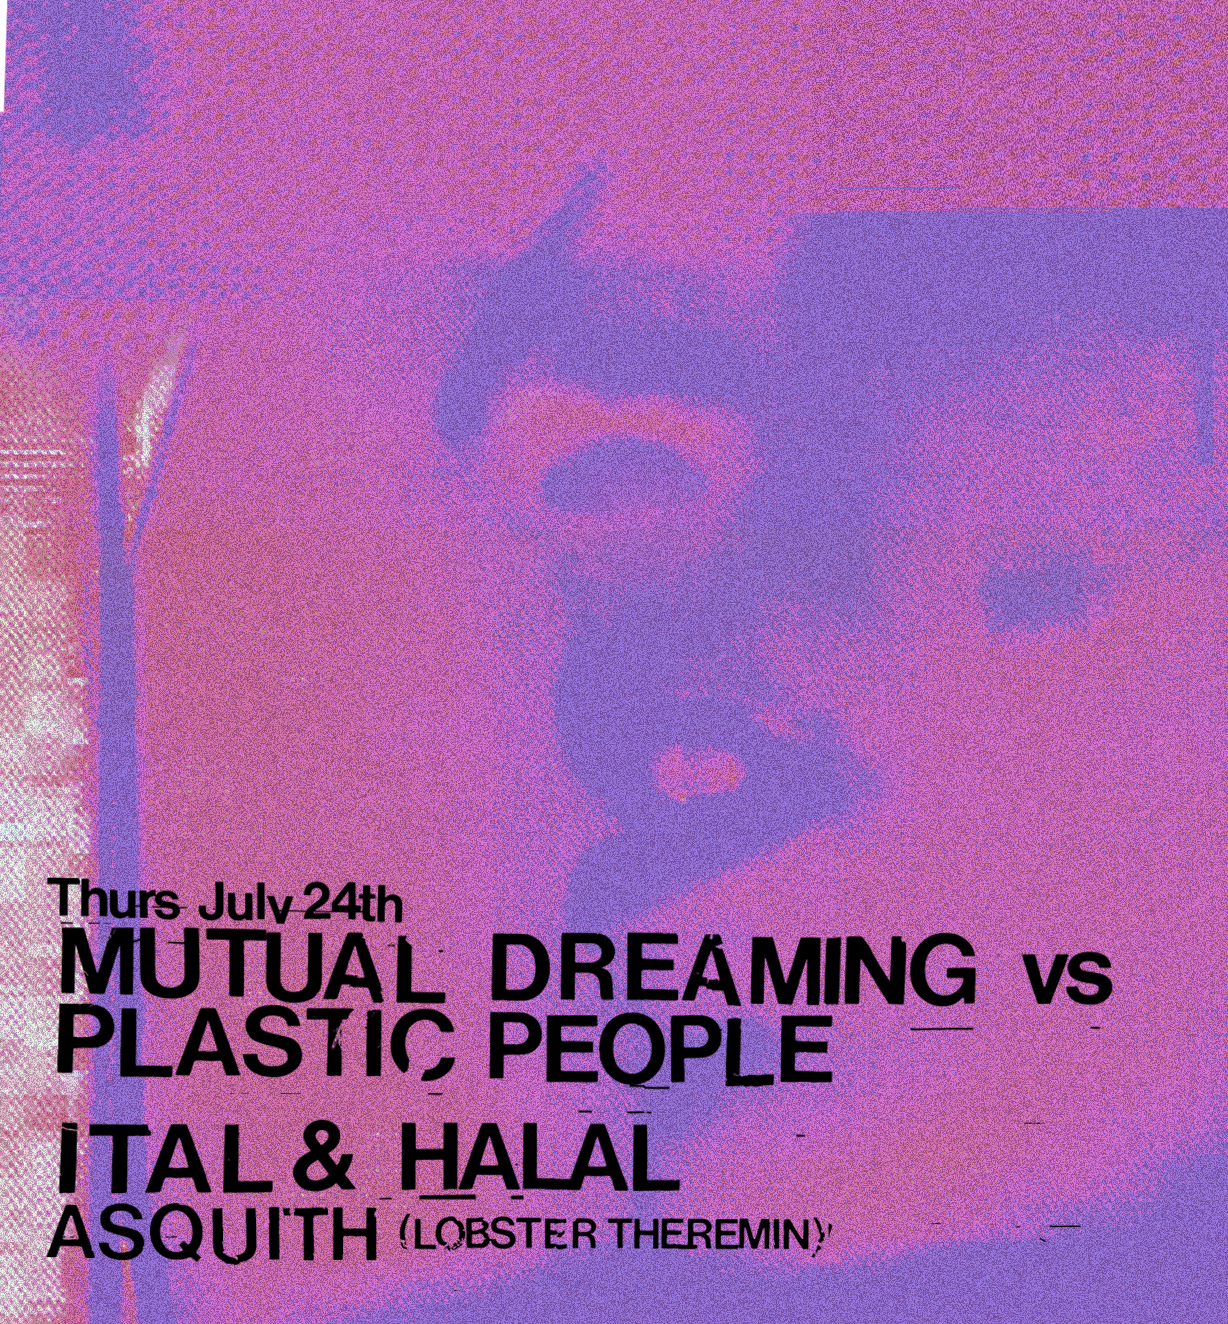    Mutual Dreaming vs Plastic People: Ital &amp; Halal, Asquith   London, July 2014 